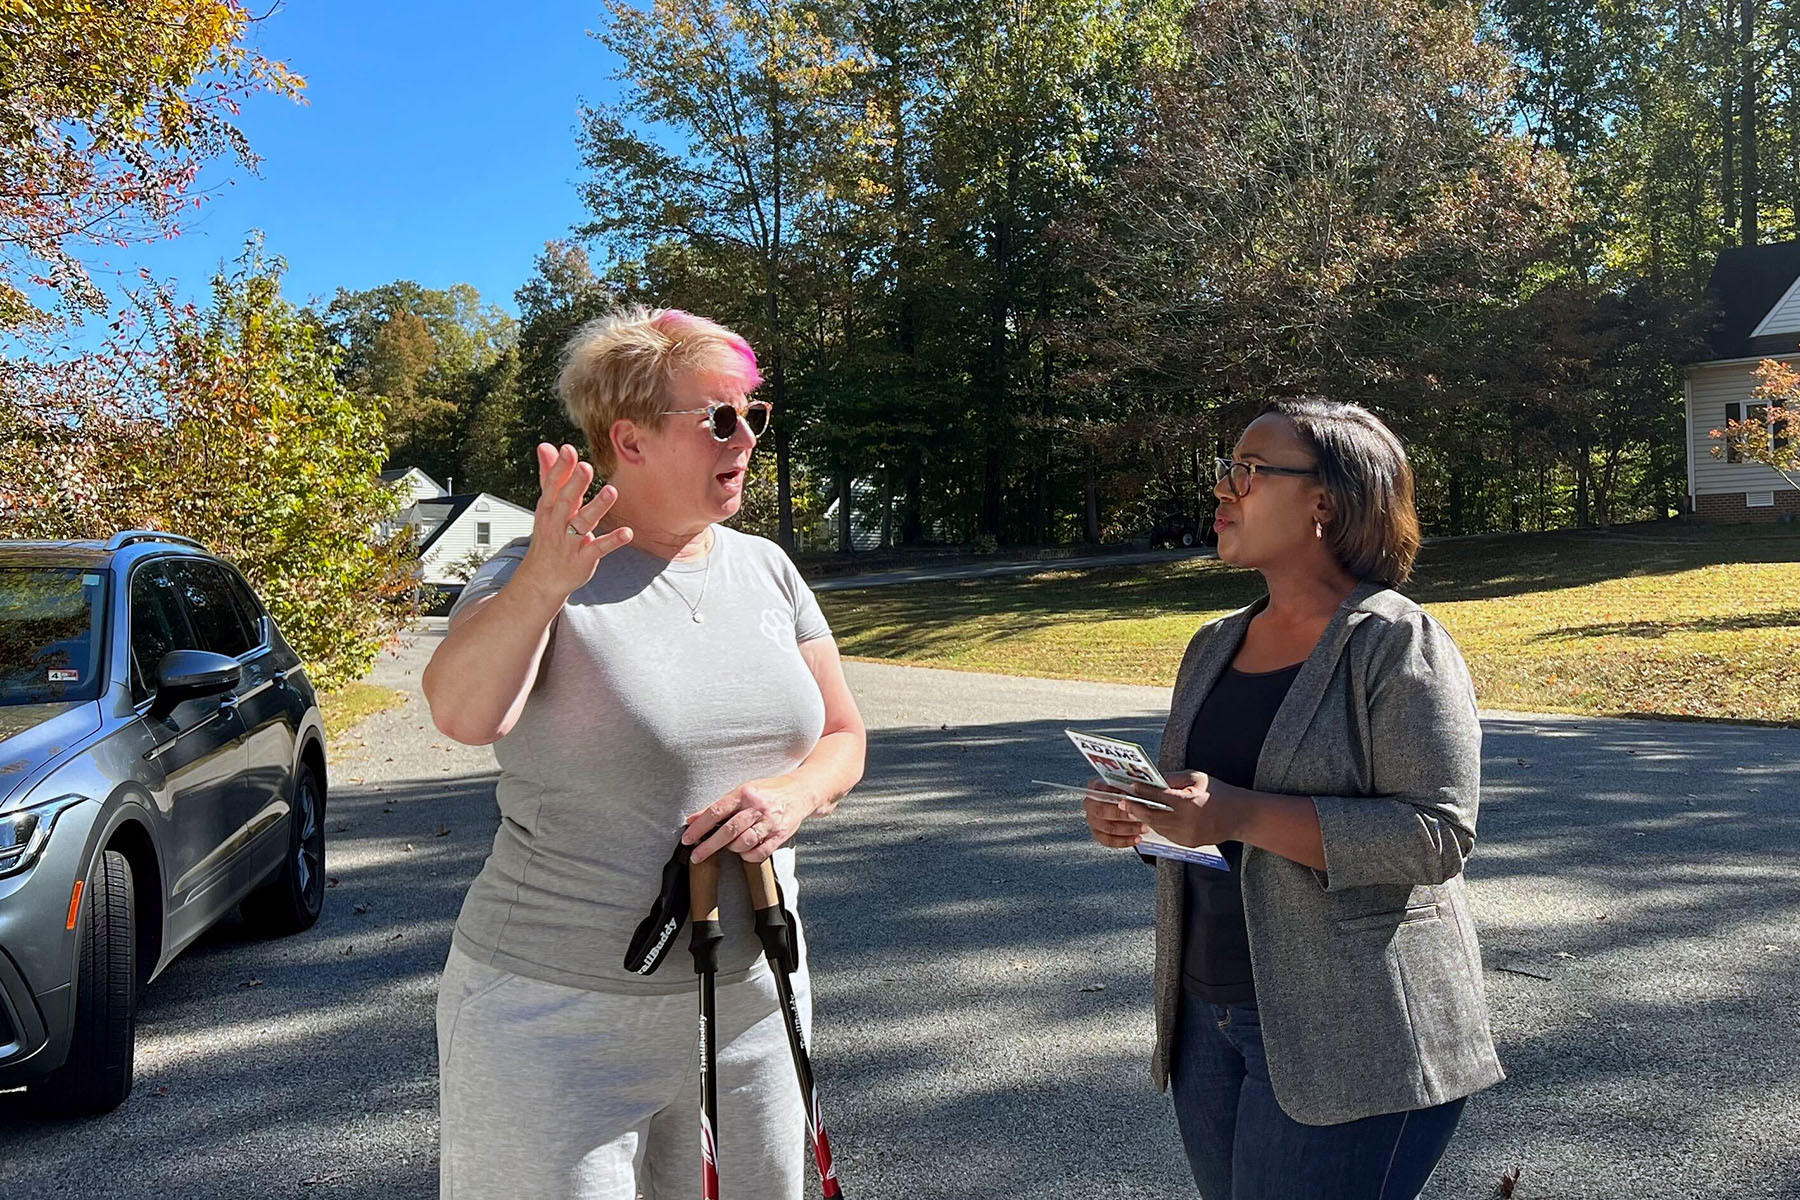 Democratic Virginia House candidate Kim Pope Adams speaks to a voter outside.